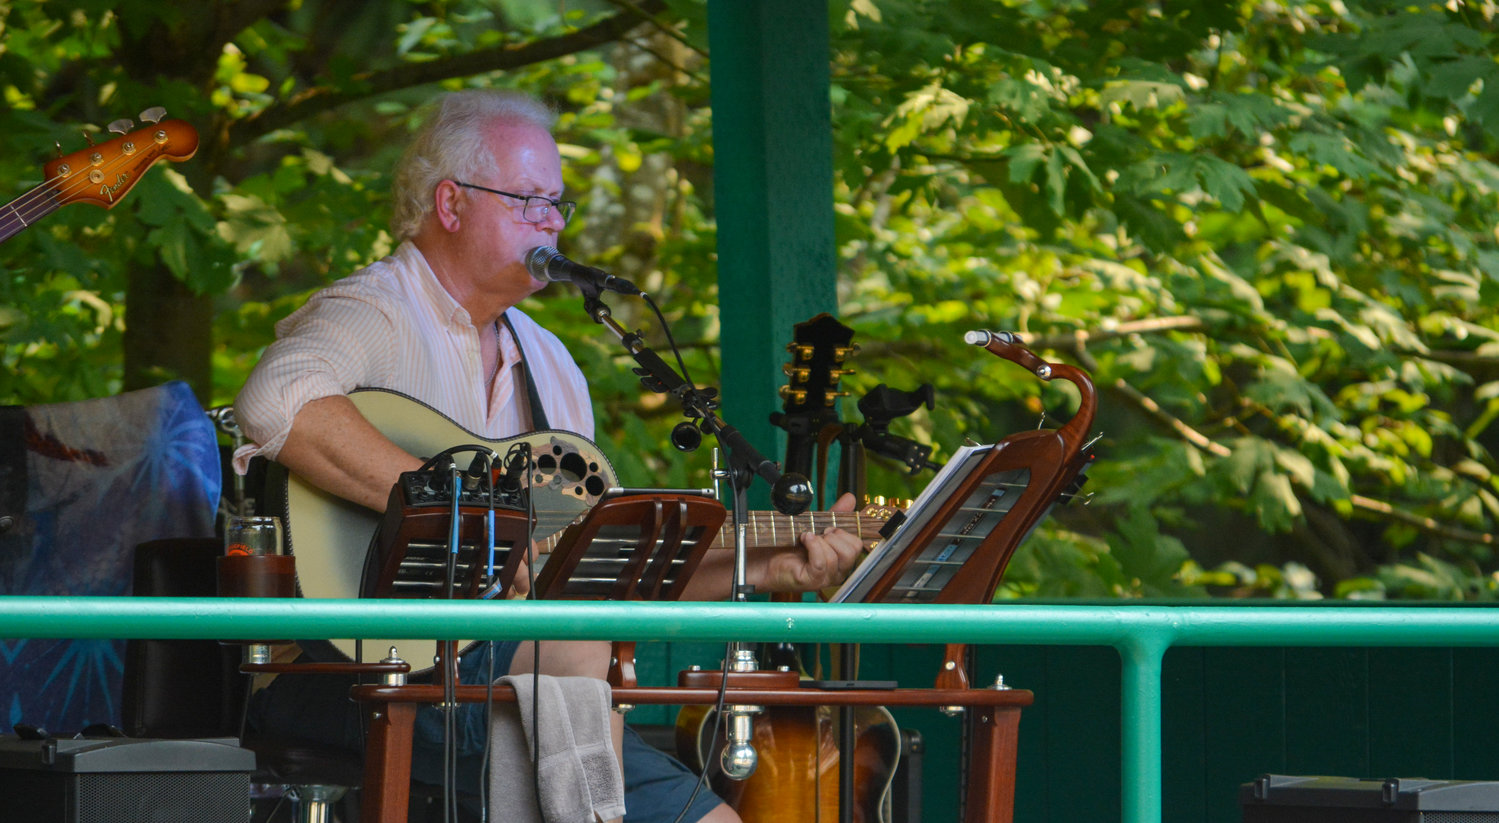 Live music echoed through Abrams Park this weekend during the Ridgefield Sausage Festival.